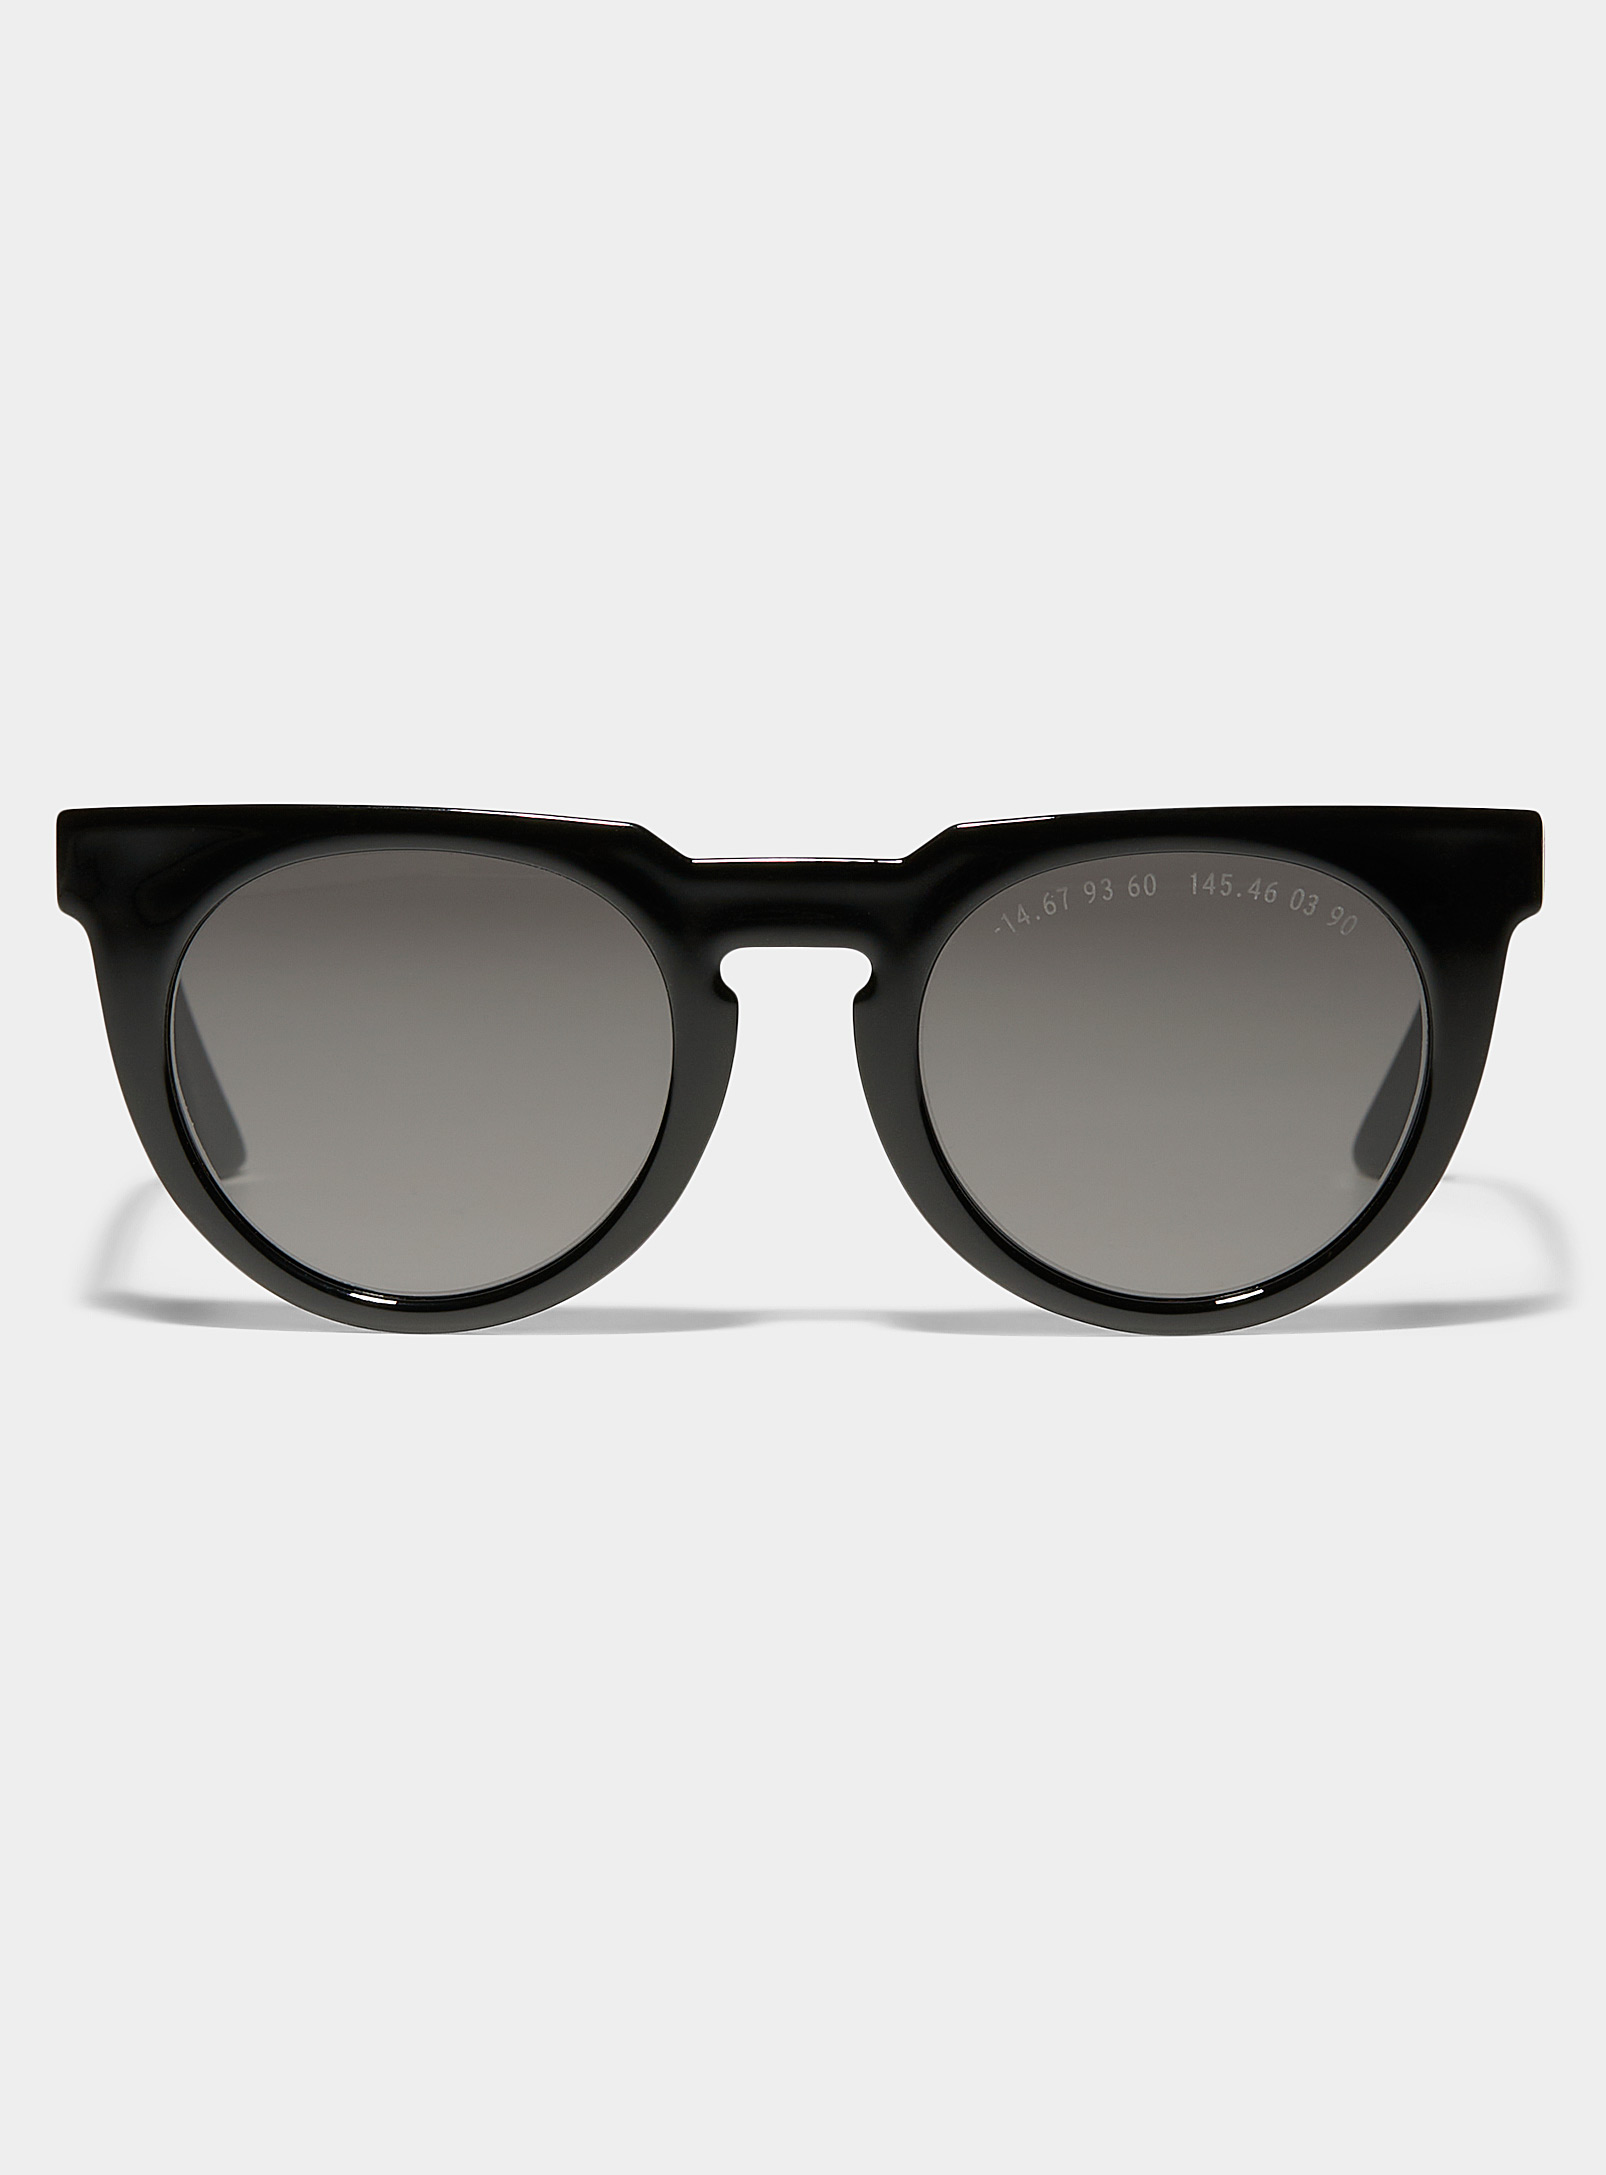 Clean Waves Type 05 Round Sunglasses In Black